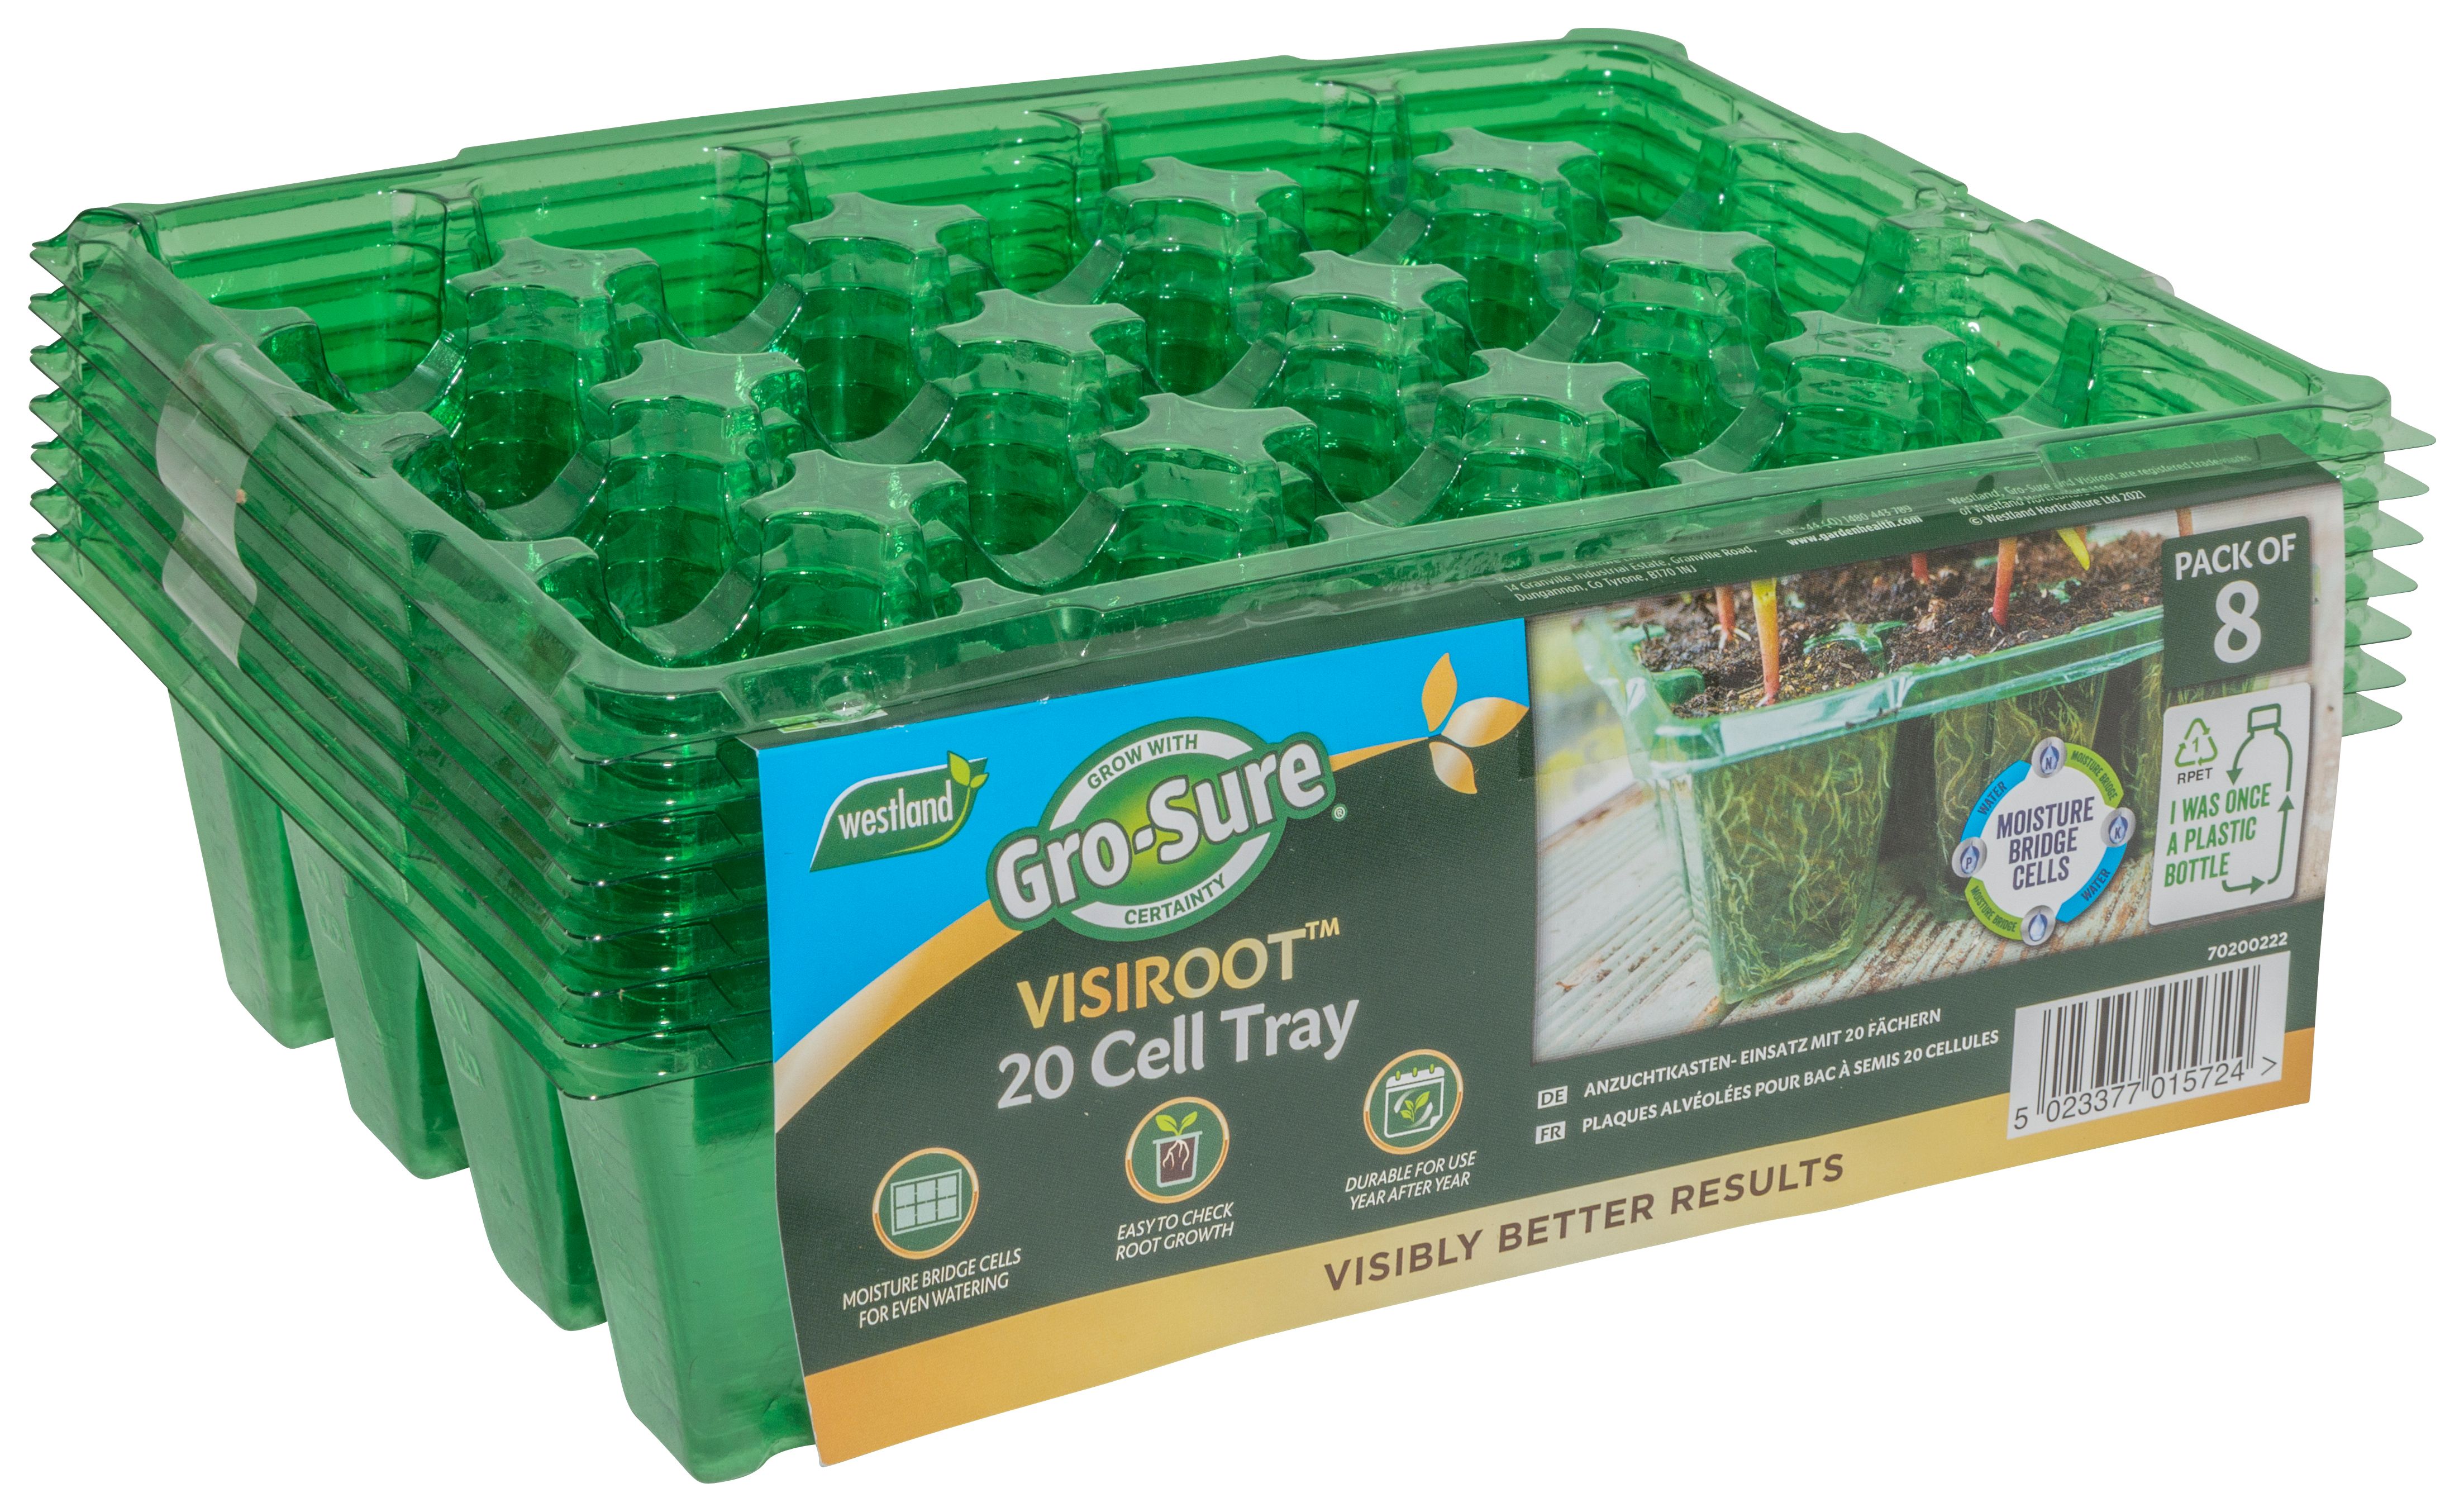 Image of Gro-Sure Visiroot 20 Cell Tray - Pack of 8